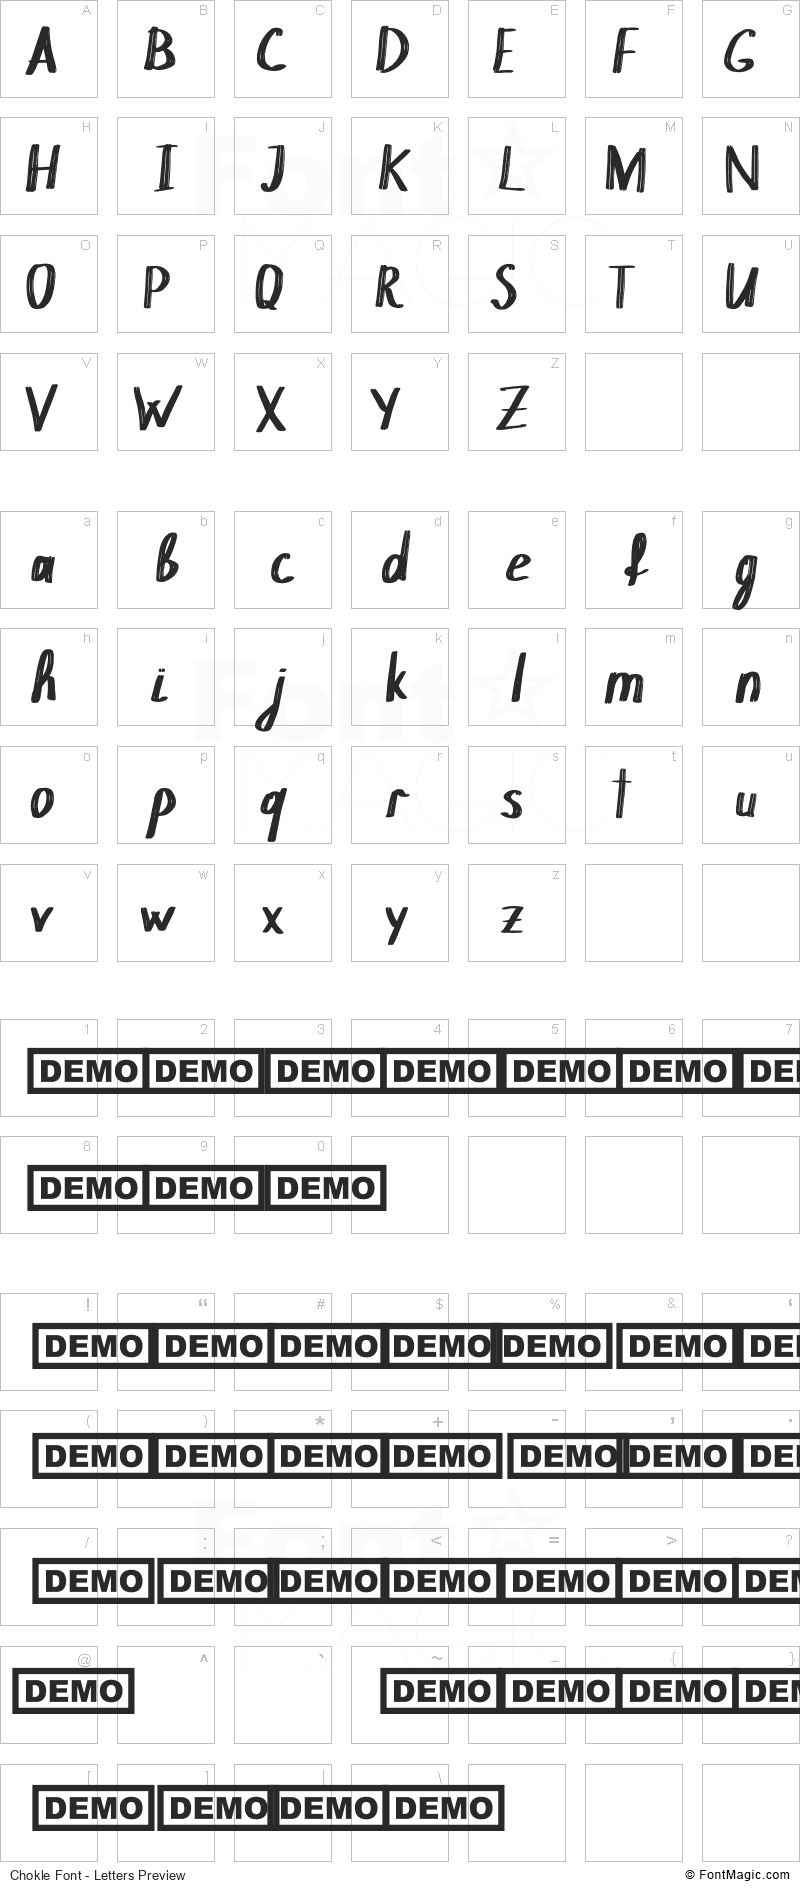 Chokle Font - All Latters Preview Chart